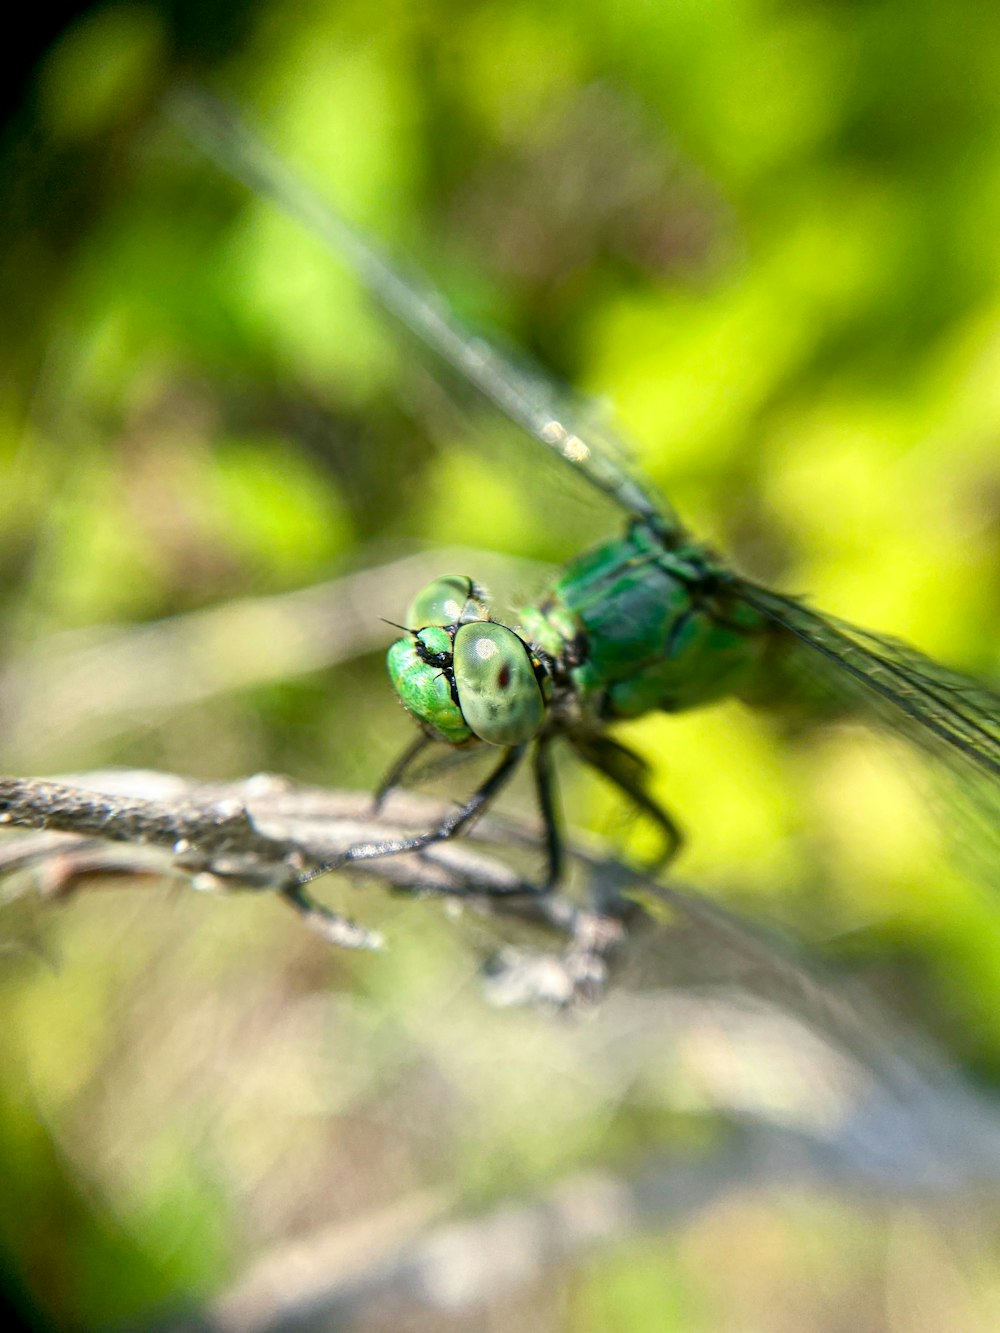 blue and green dragonfly on brown tree branch in tilt shift lens